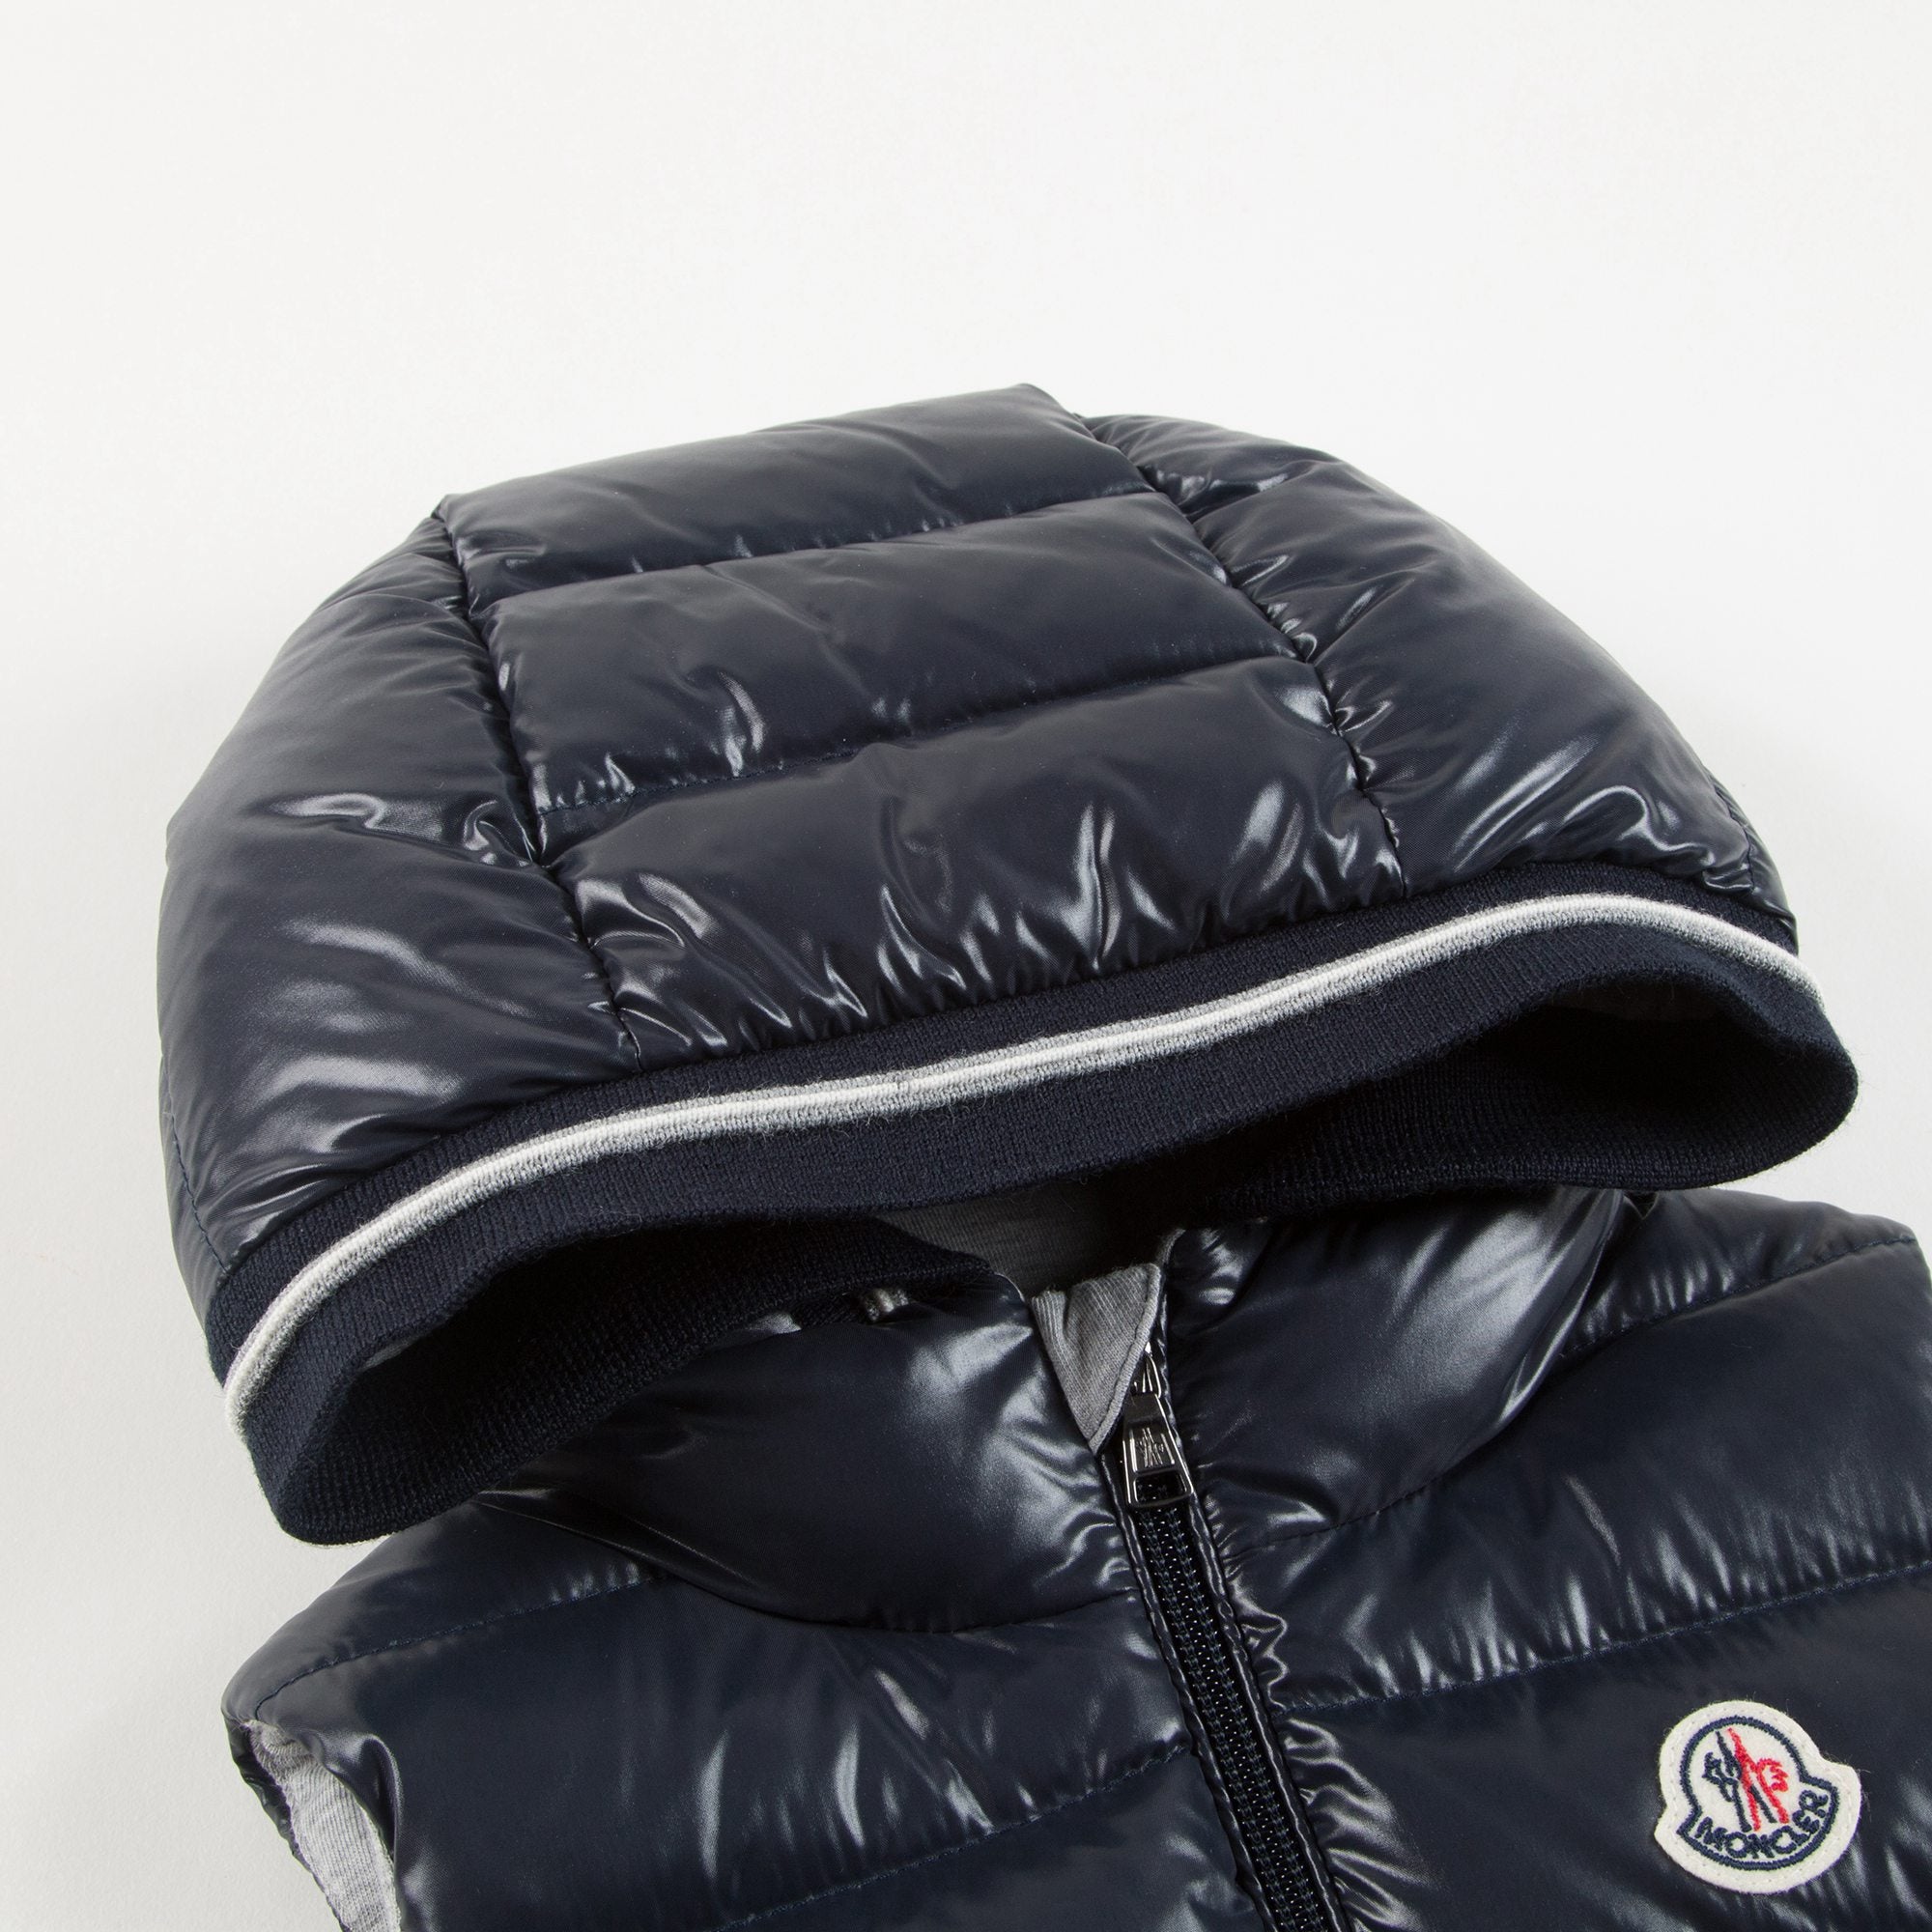 Baby Navy Blue Down Padded Gilet